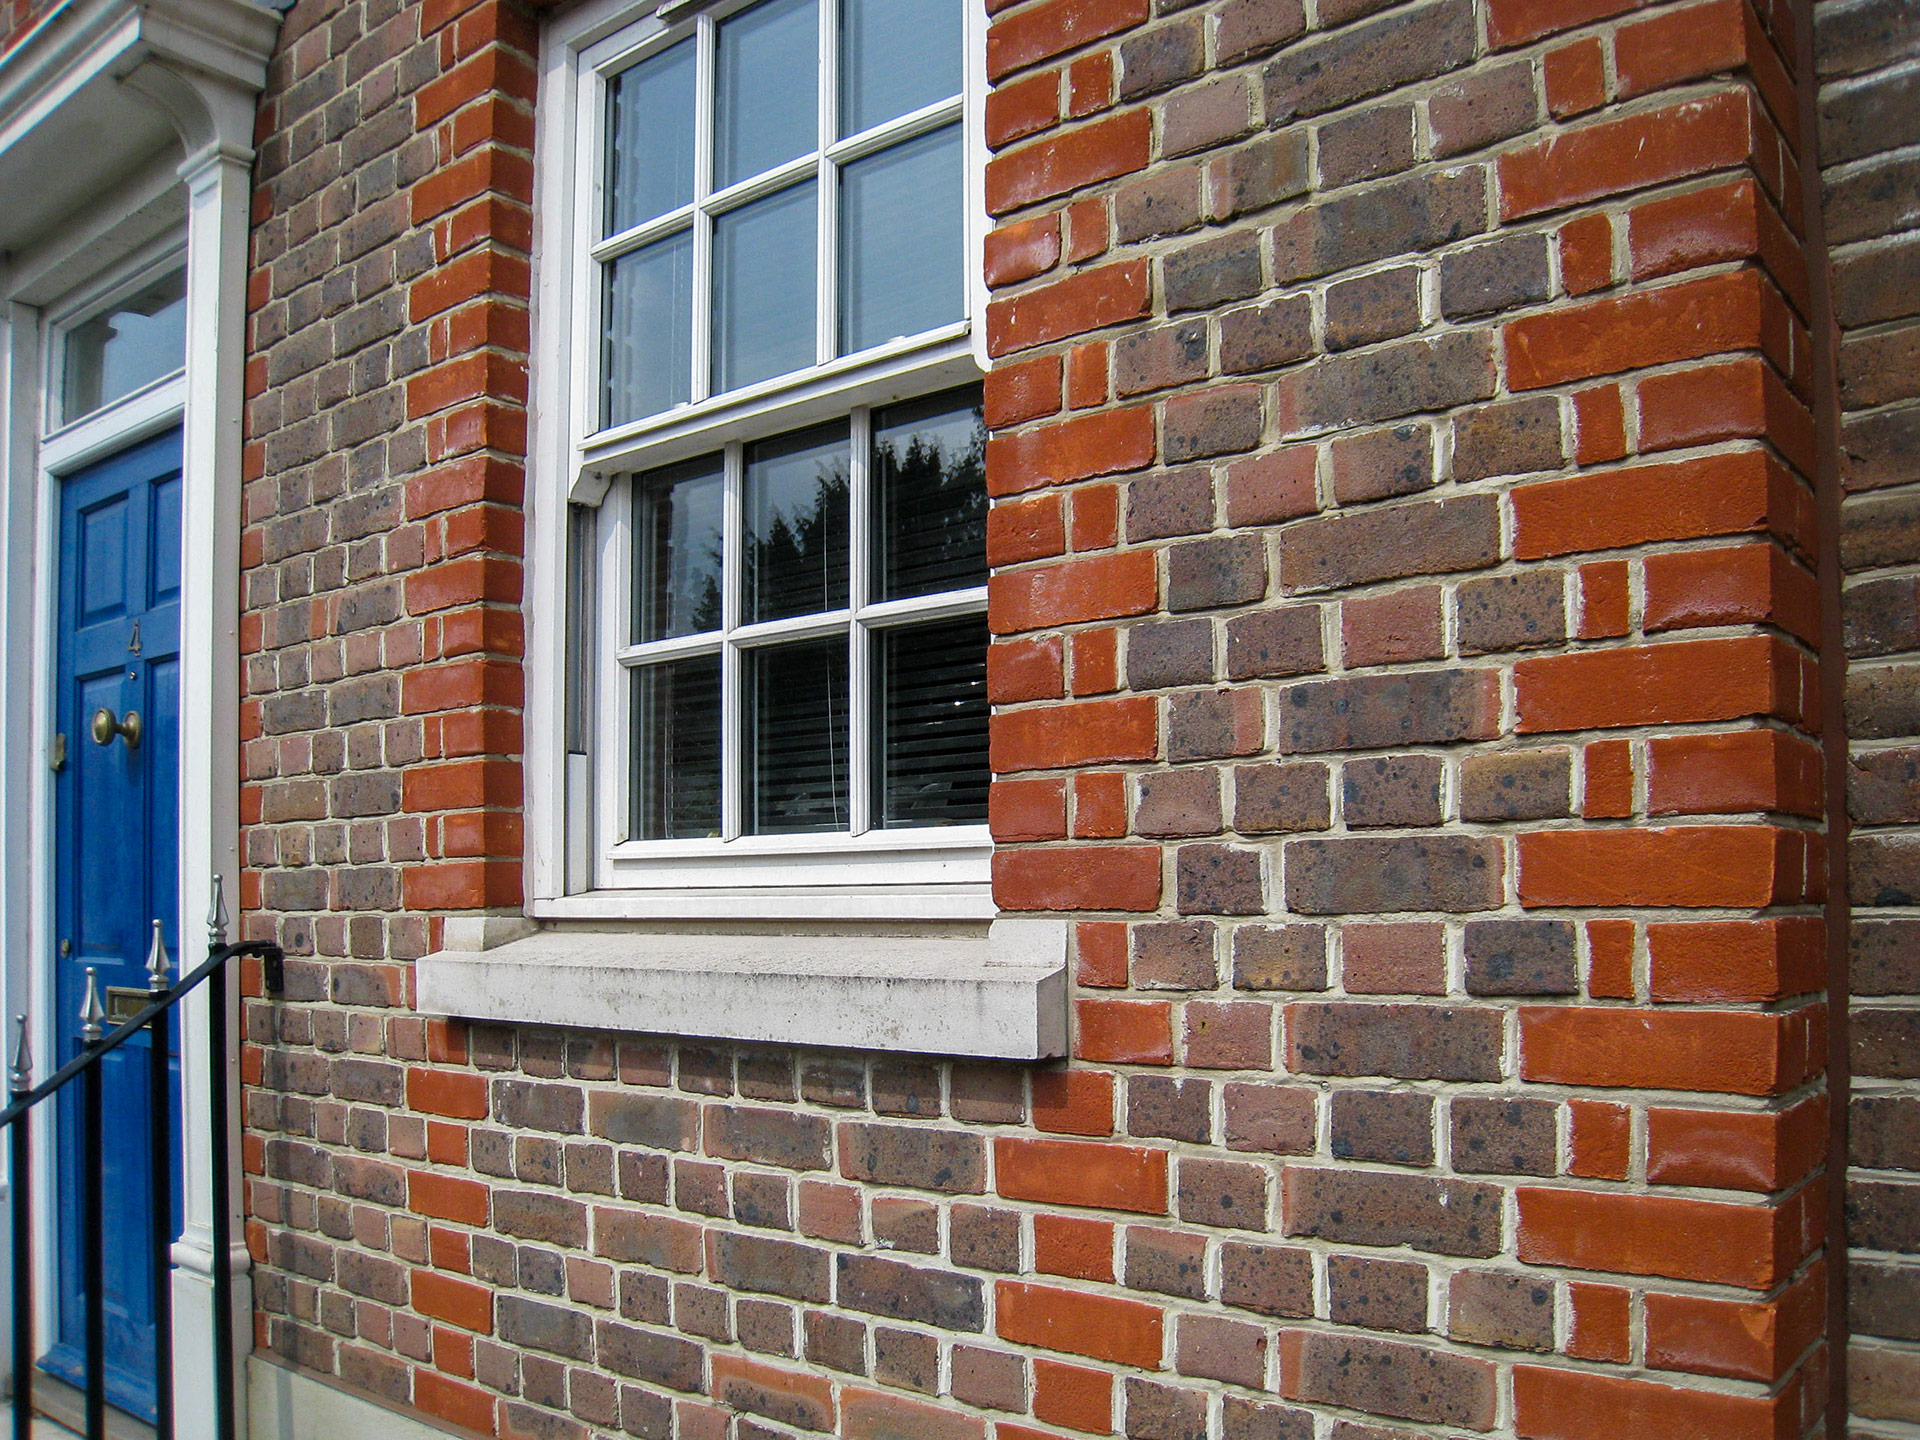 detailed view of brick work and window